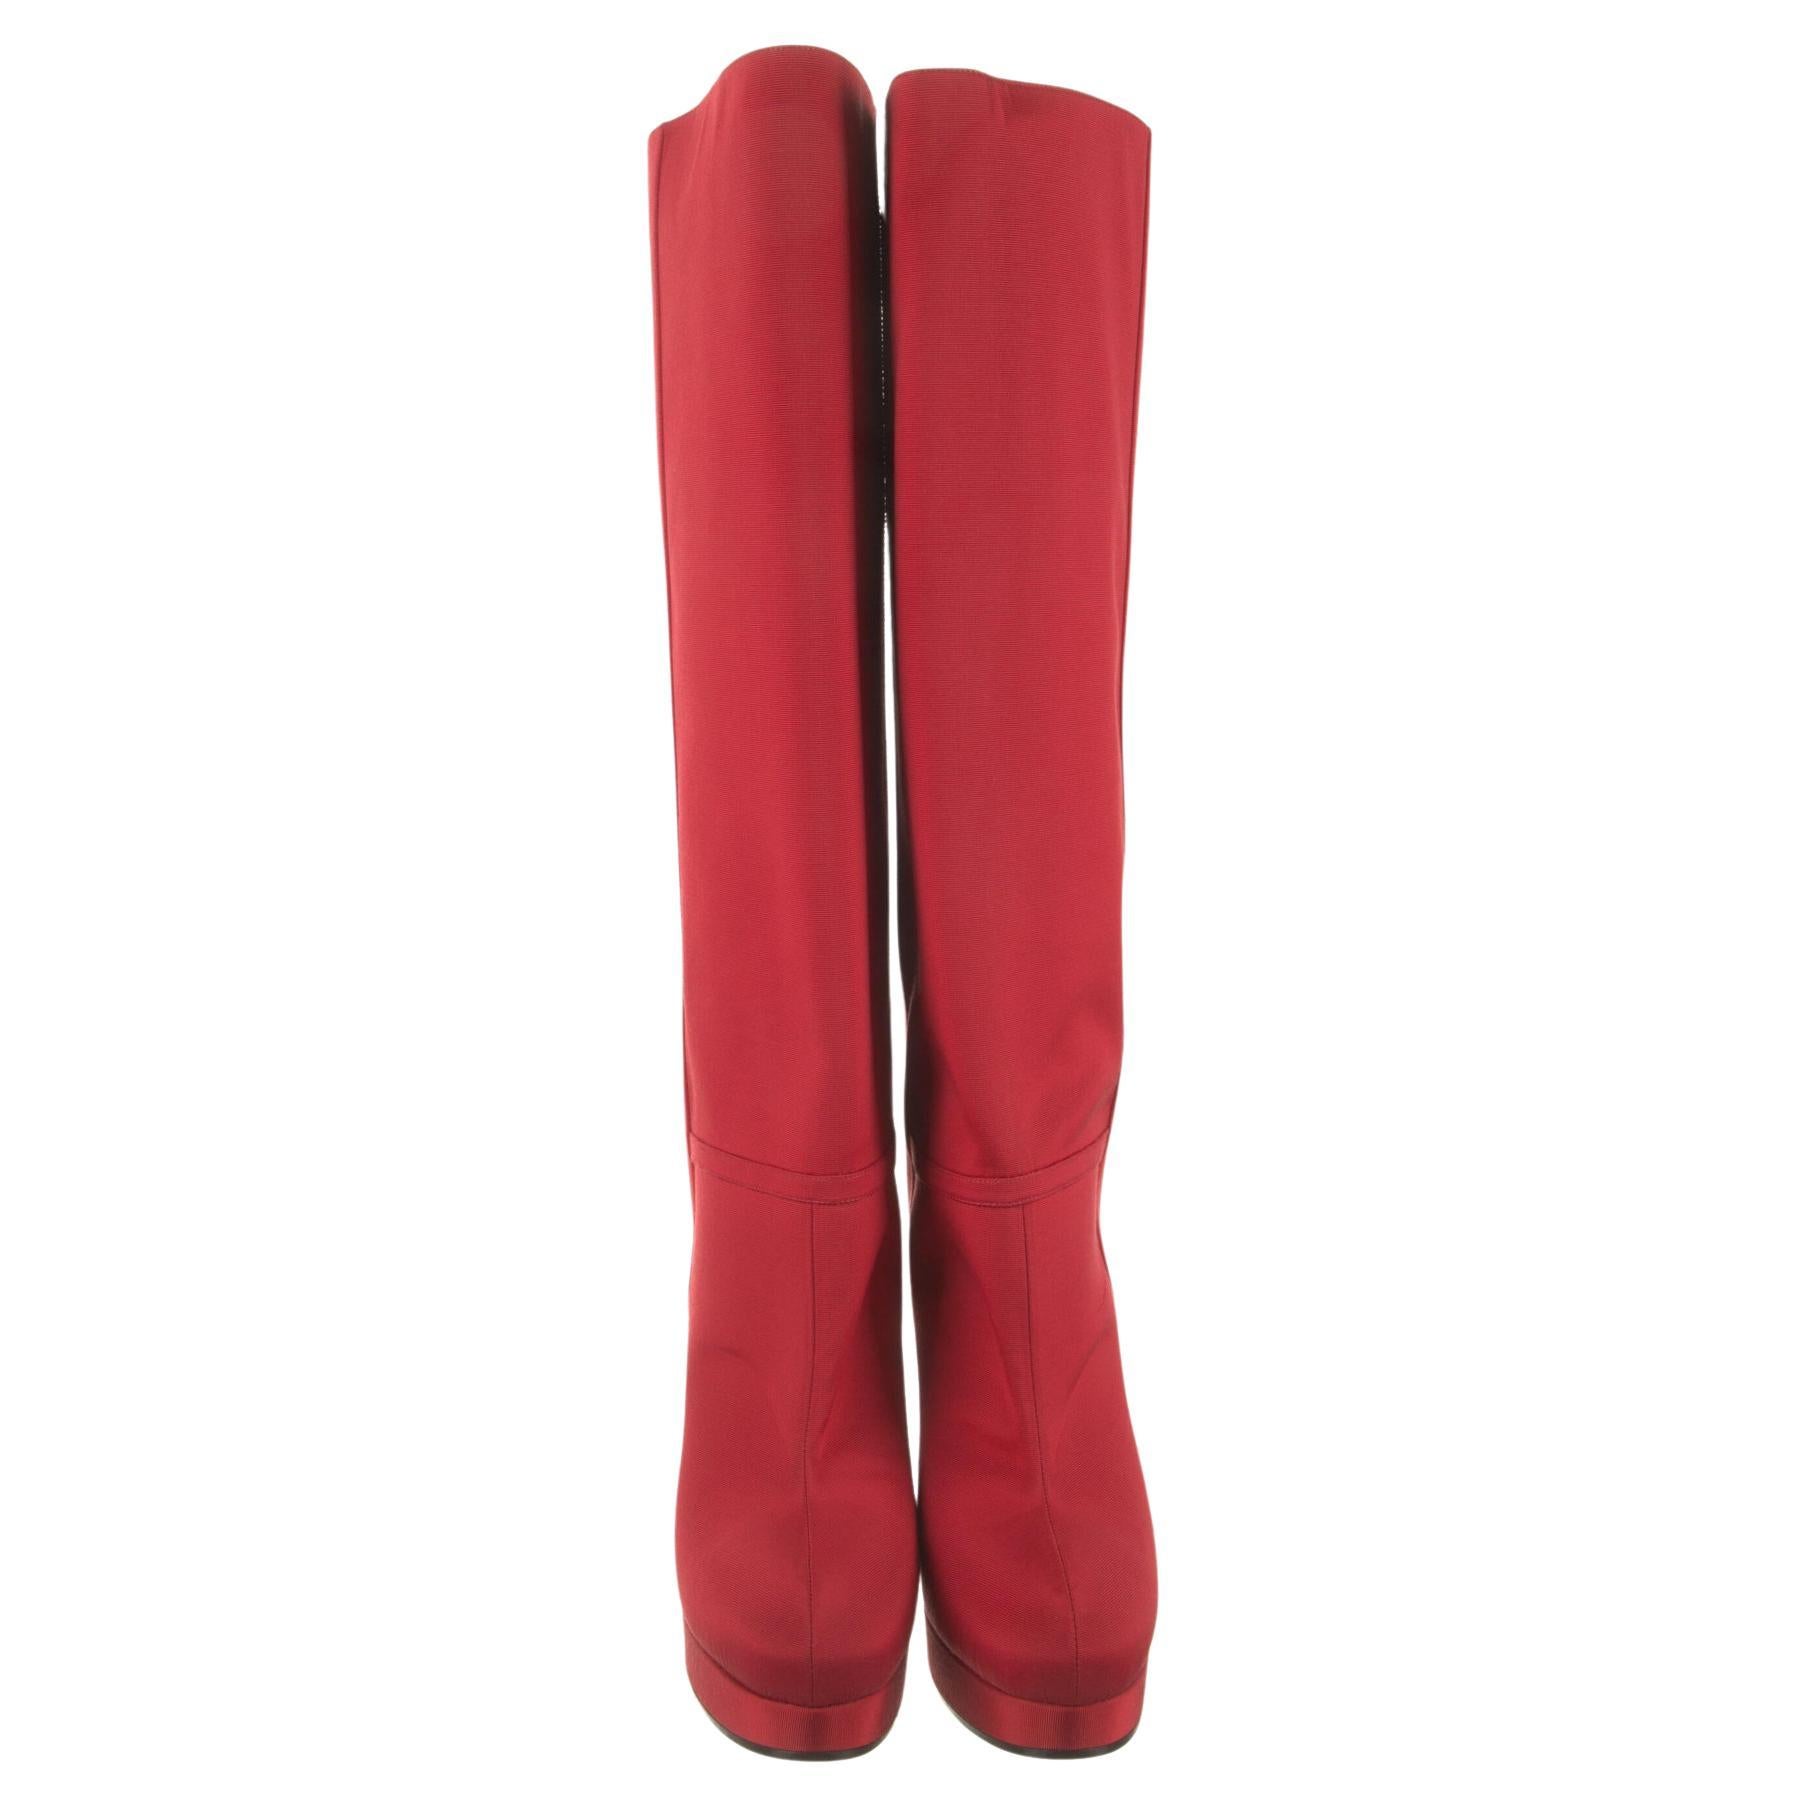 Brand New With Box
$2010
Fall 2019
Size: 36.5
Alessandro Michele
Gucci Knee-High Boots
Red Cotton Satin
Semi-Pointed Toes
Block Heels with Platform
Includes Box

Circumference: 17